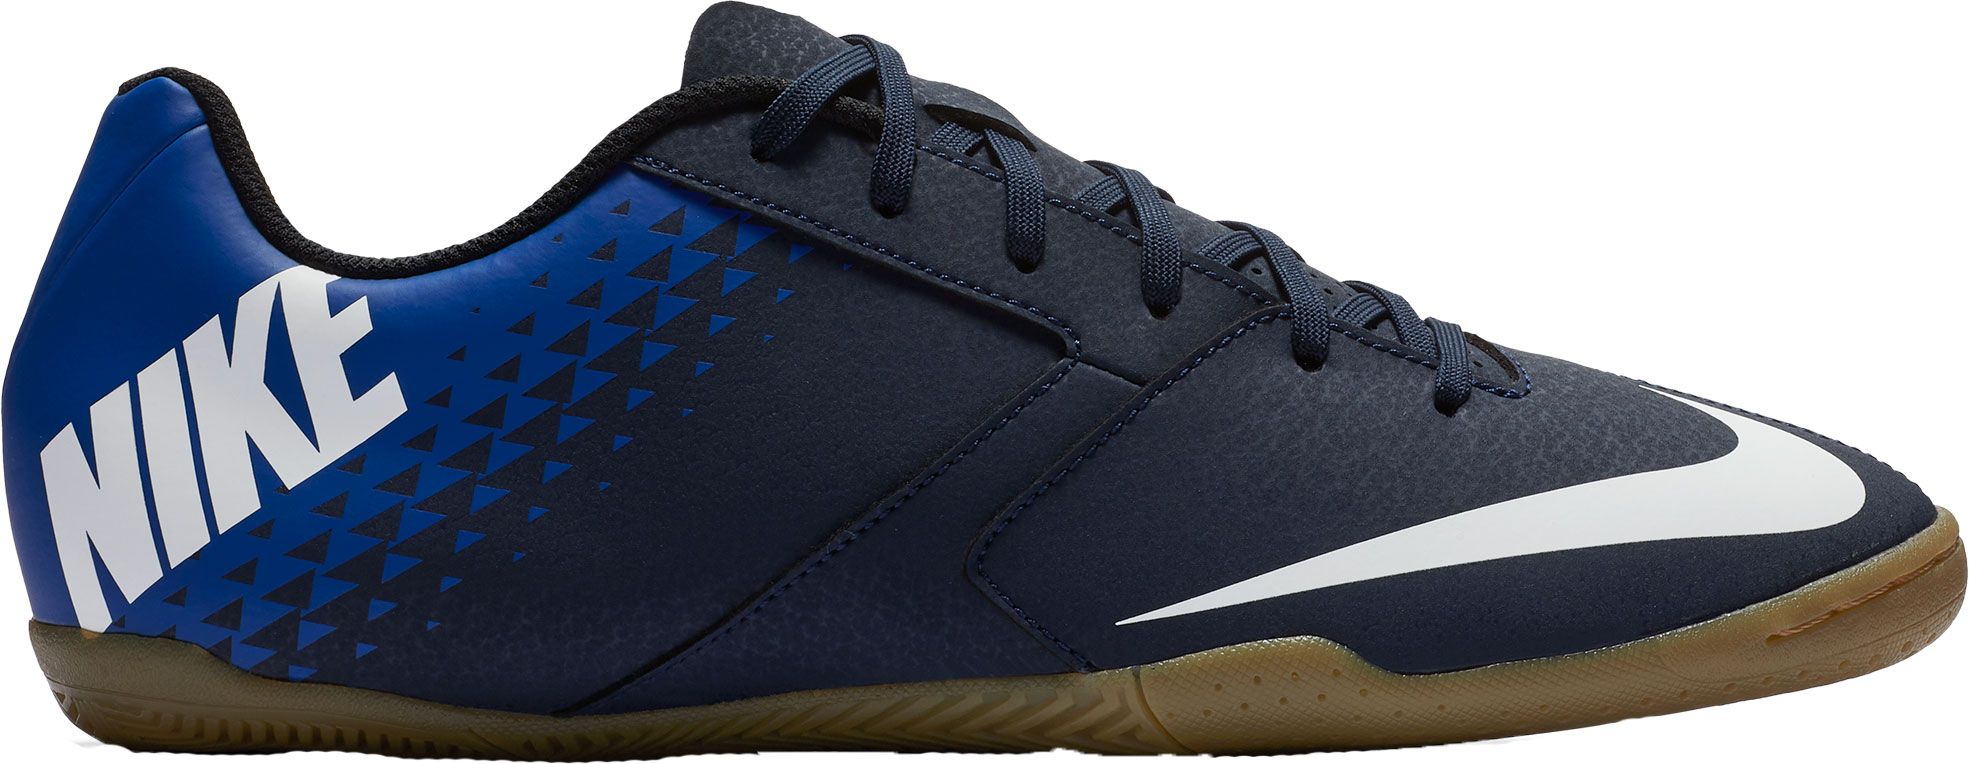 nike womens indoor soccer shoes